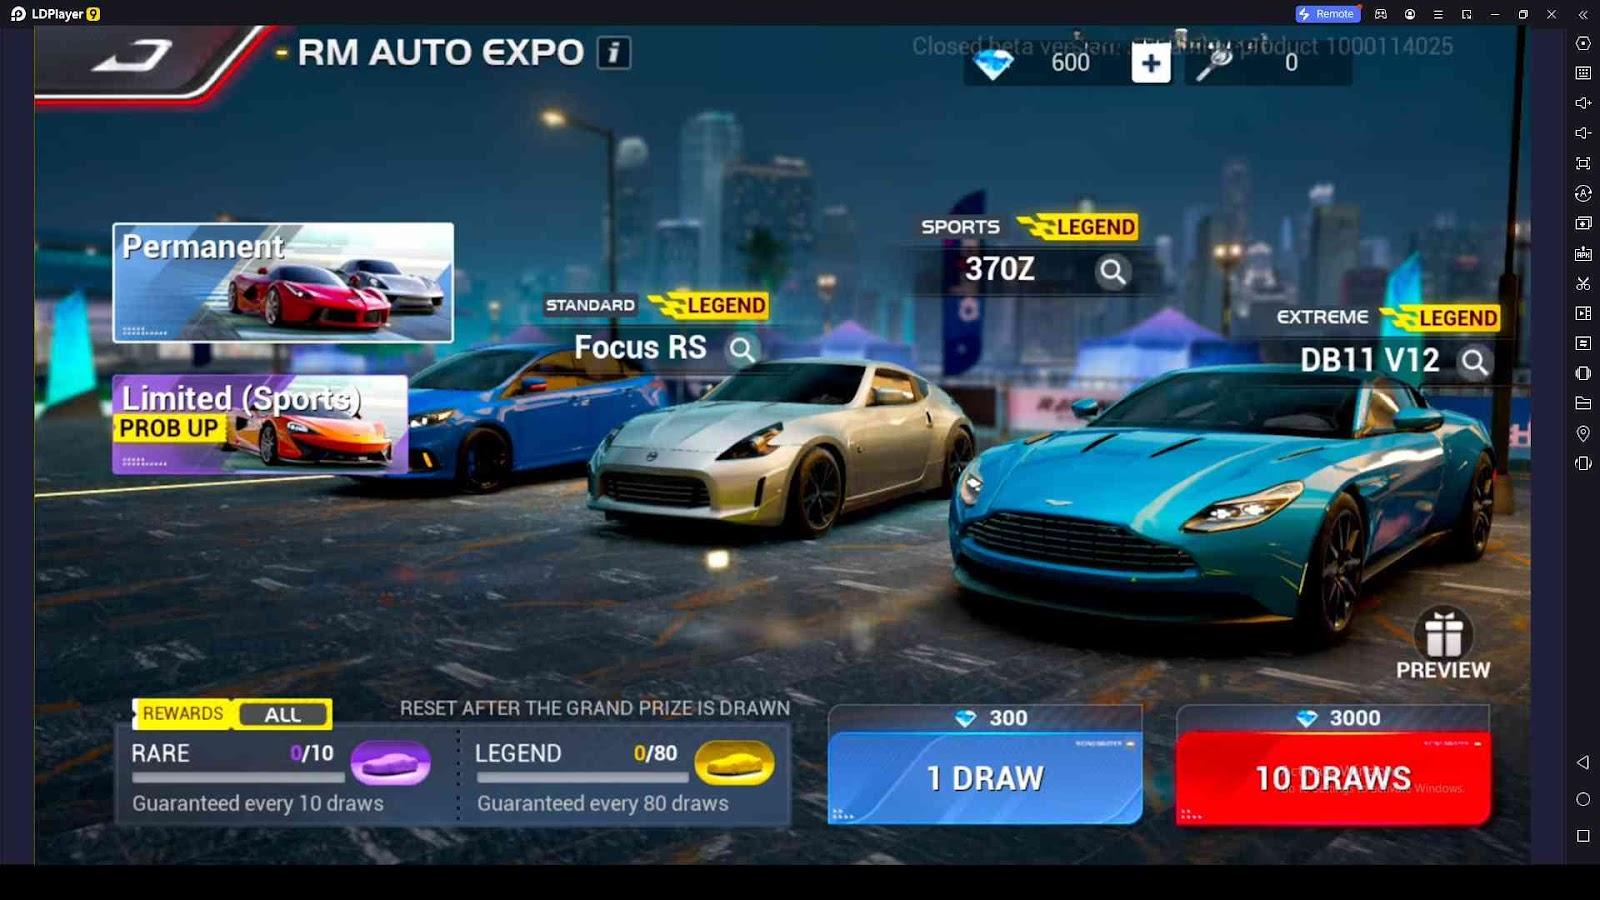 Own Legendary Cars in Racing Master